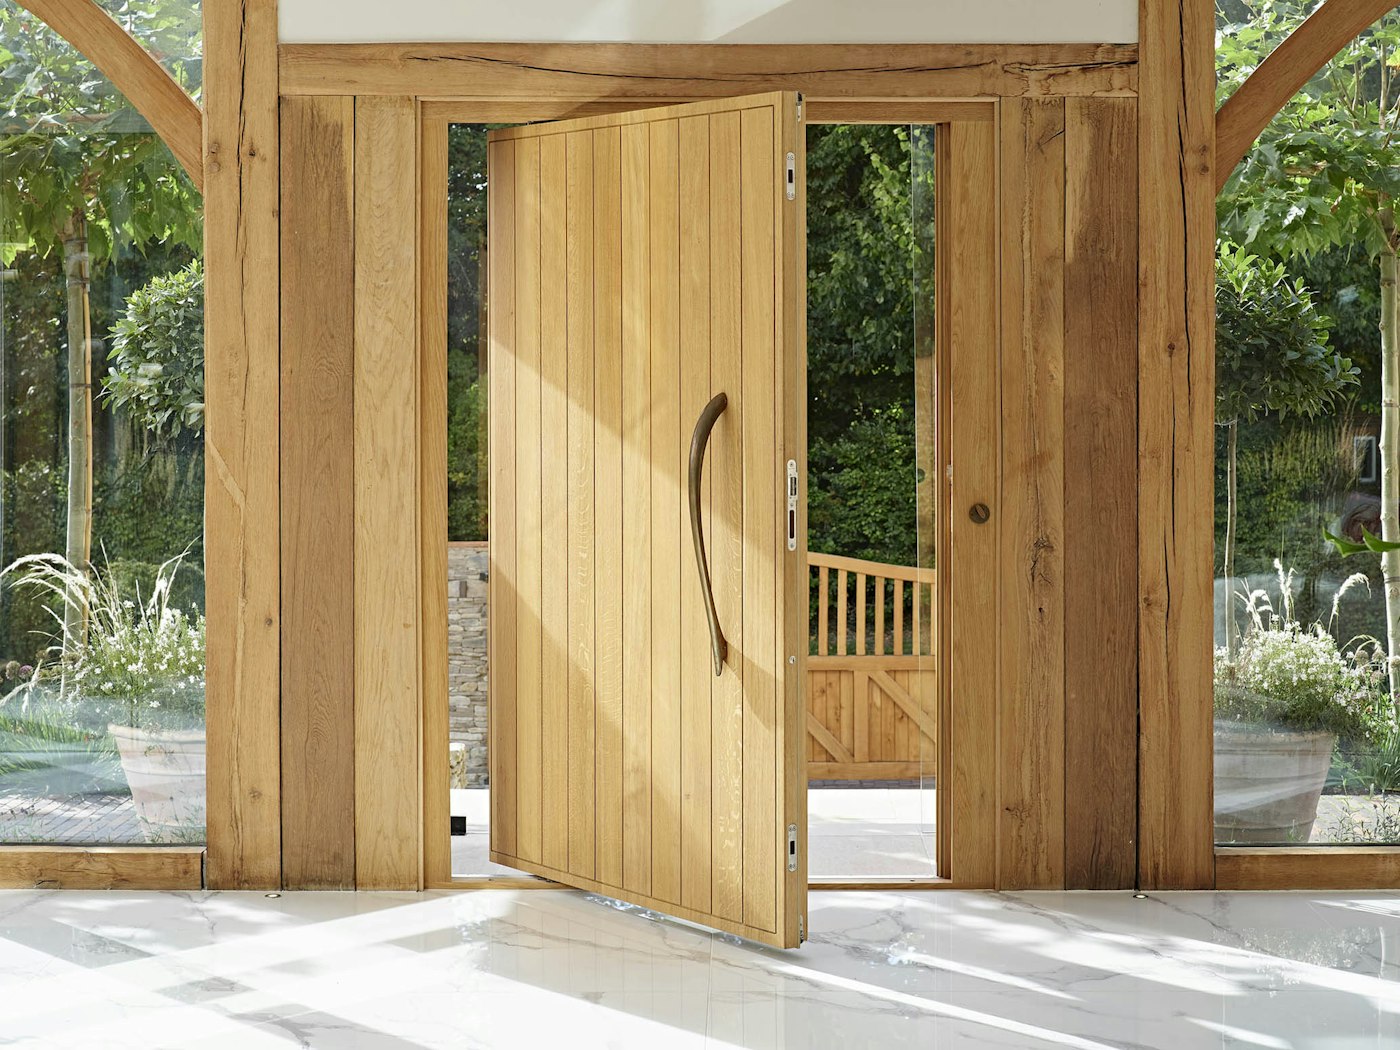 At an extra wide 1500mm, the front door also features a pivot opening and fingerprint entry 